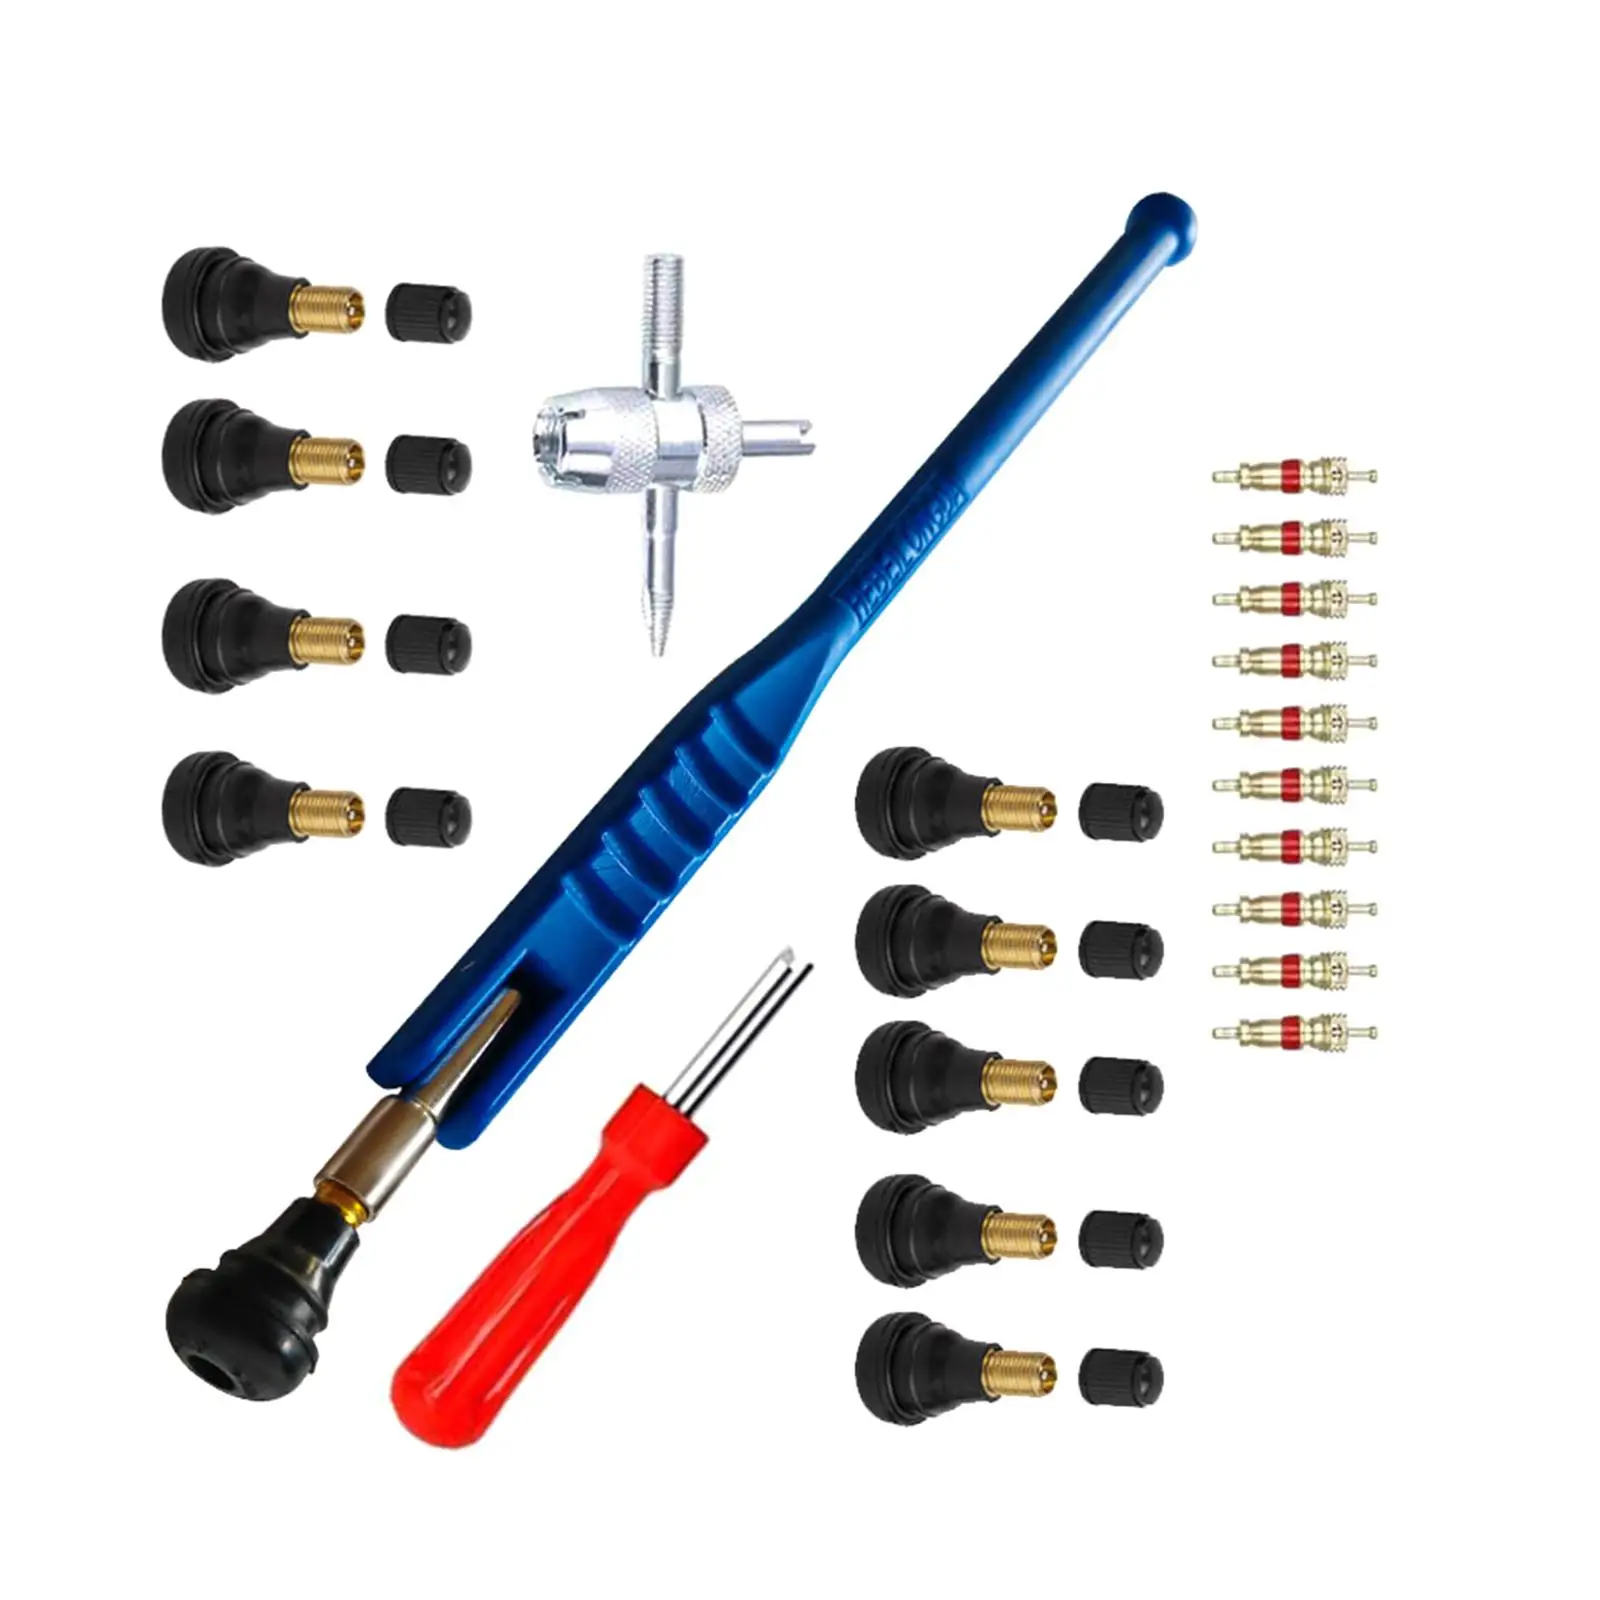 23Pcs TR412 Car Accessories Multifunctional Tire Repair Install Tool Tyre Valve Removal Tool for Car Truck Motorcycle Bike